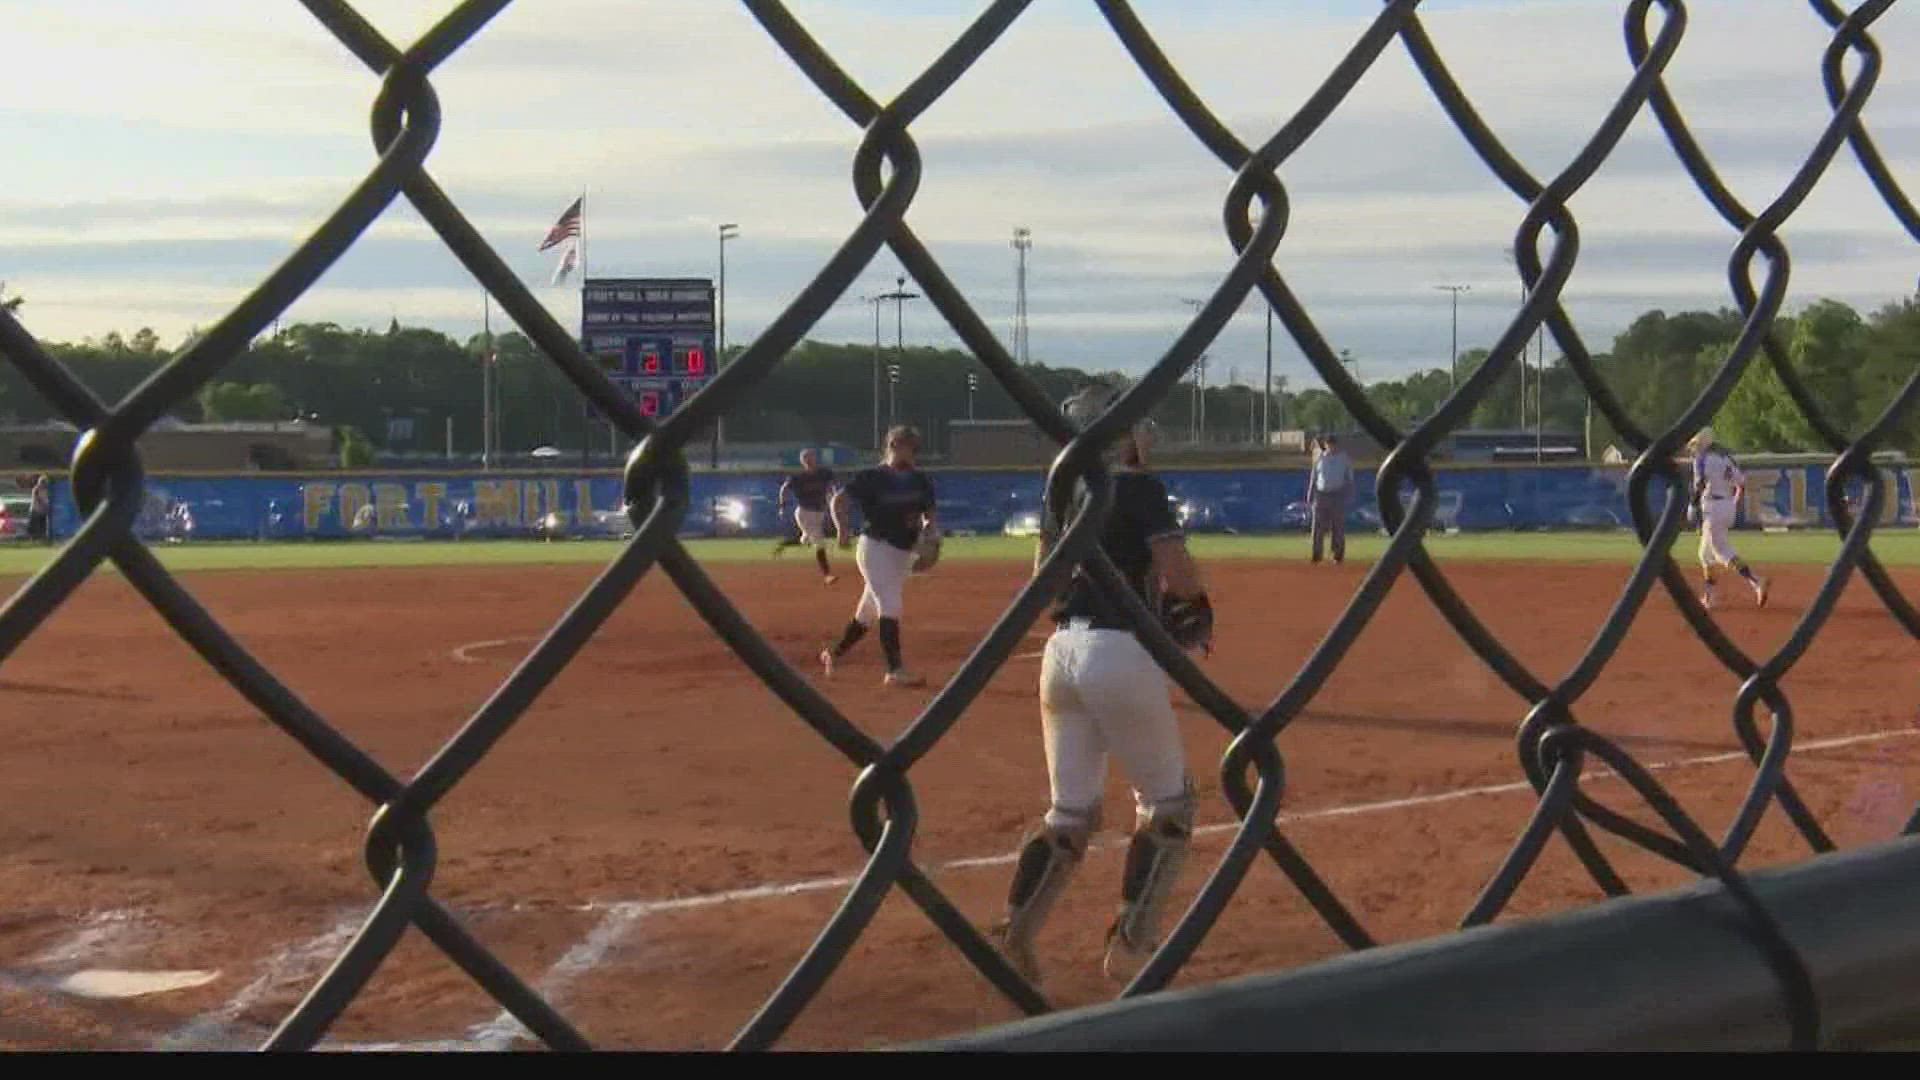 Highlights from game one of the Class 5A softball state championship series between Lexington and Fort Mill.